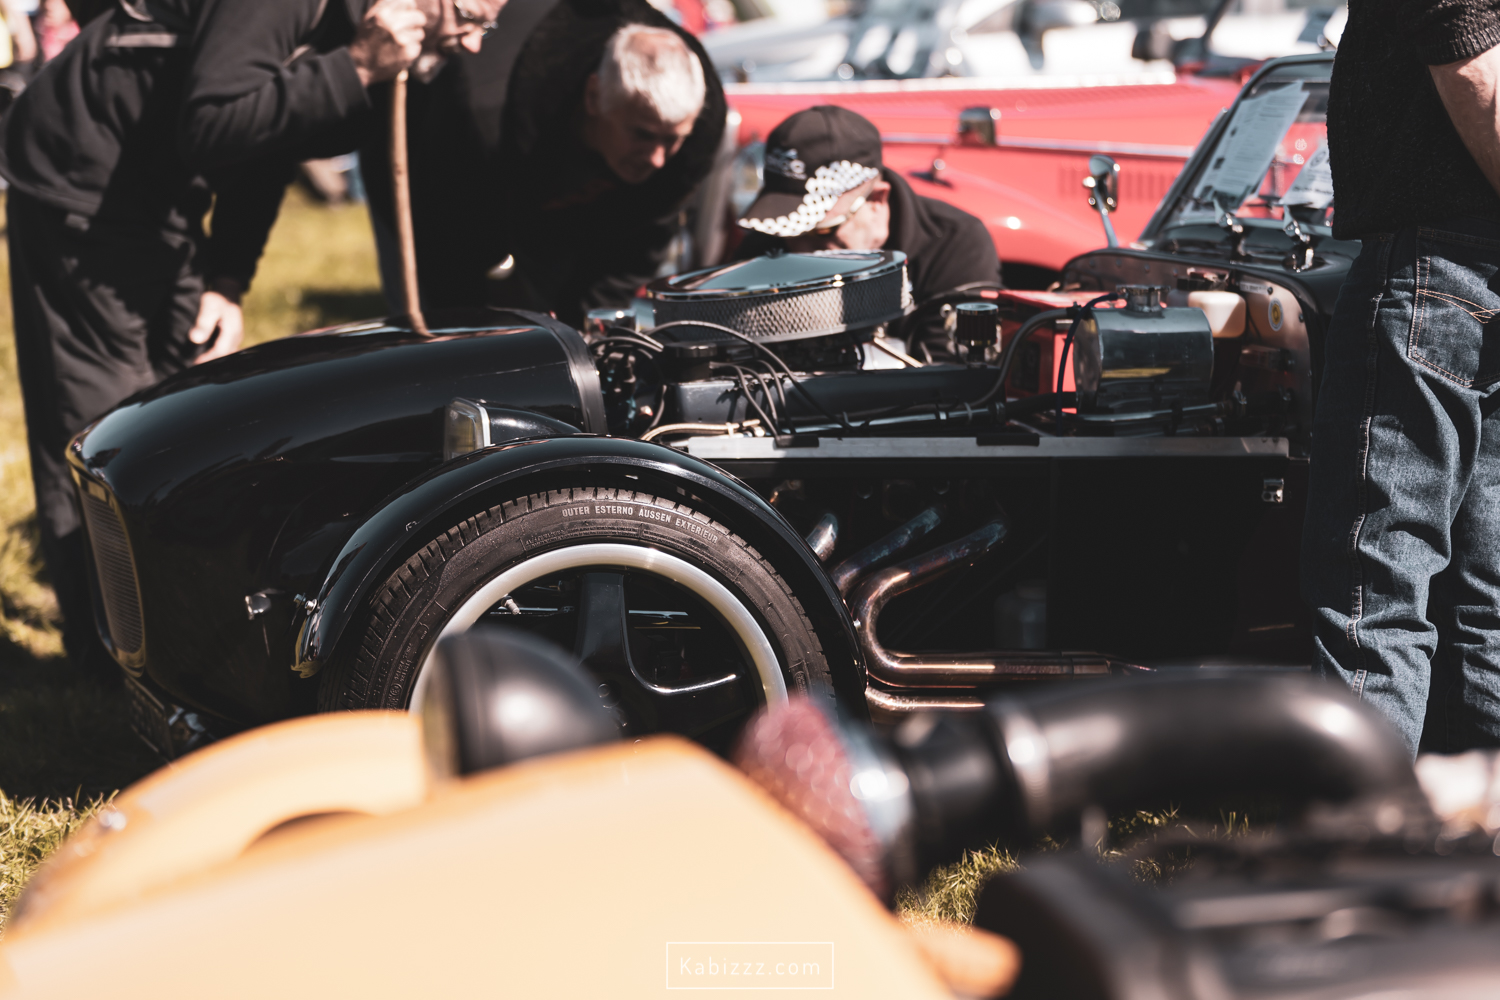 Kabizzz_Photography_Stirling_District_Classic _cars-11.jpg